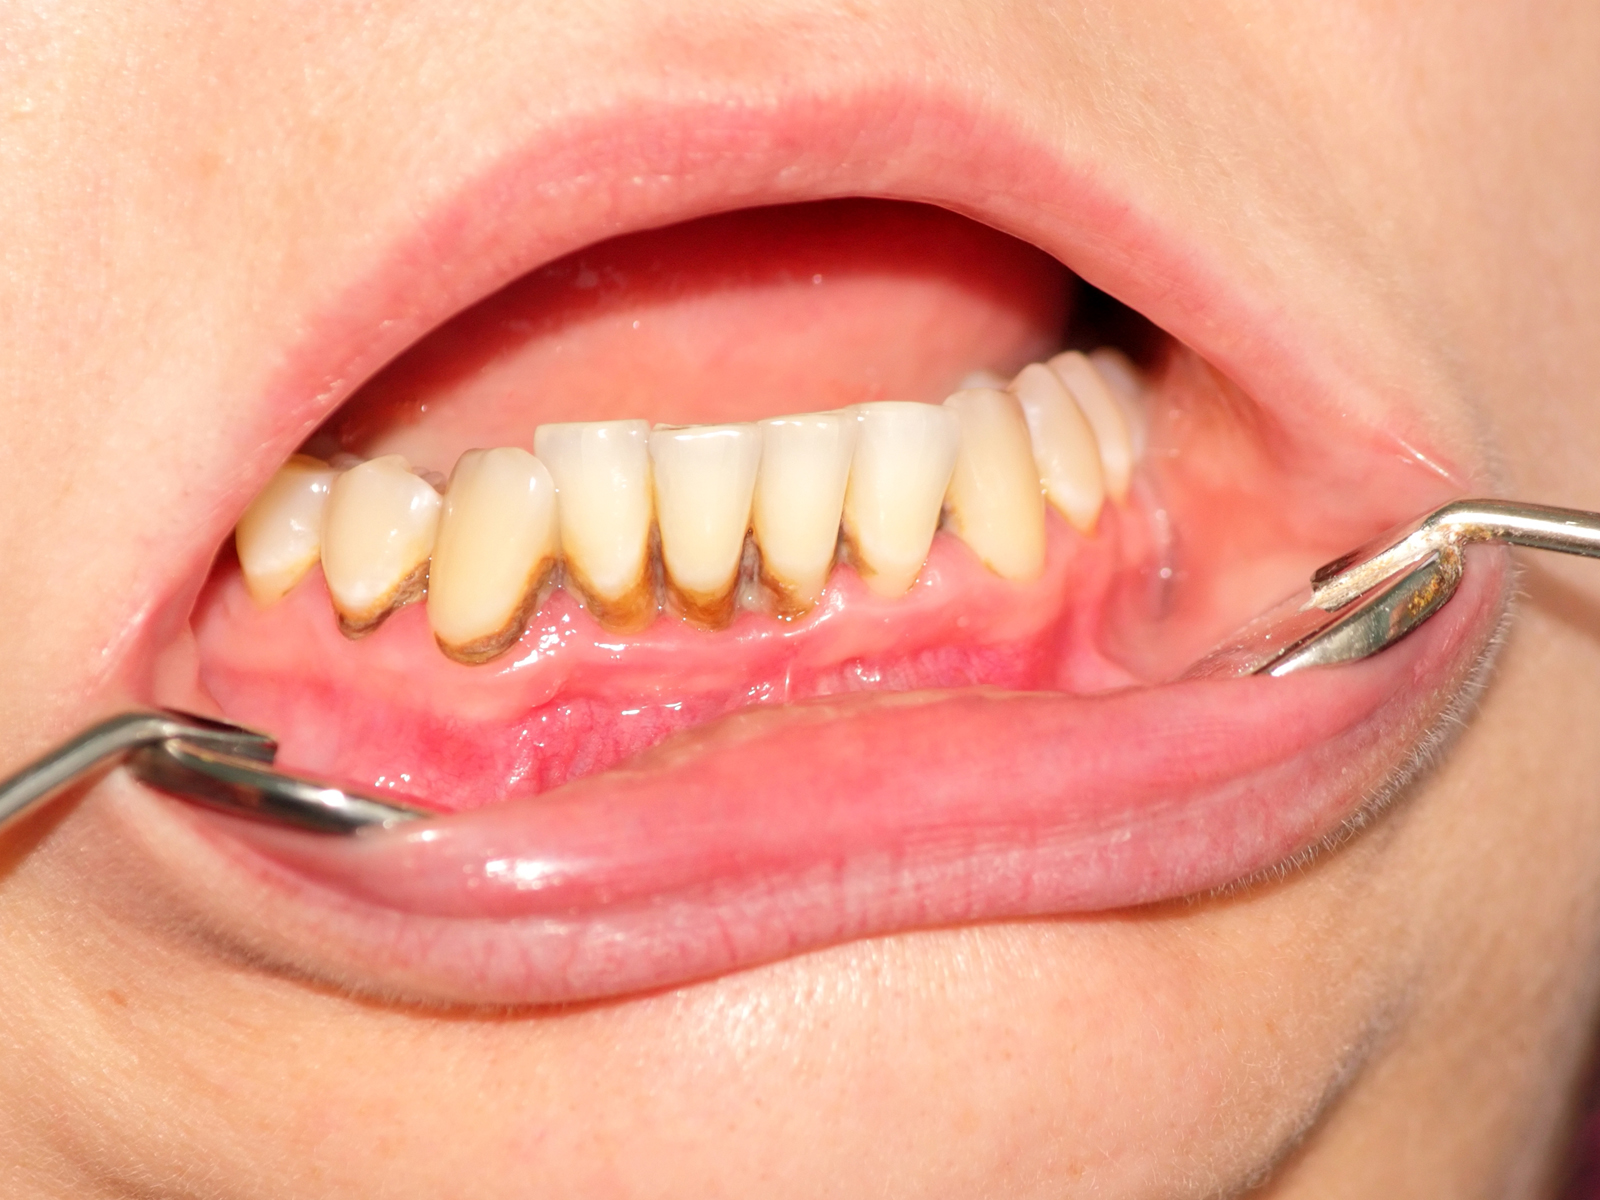 How can I remove tartar from my teeth naturally?